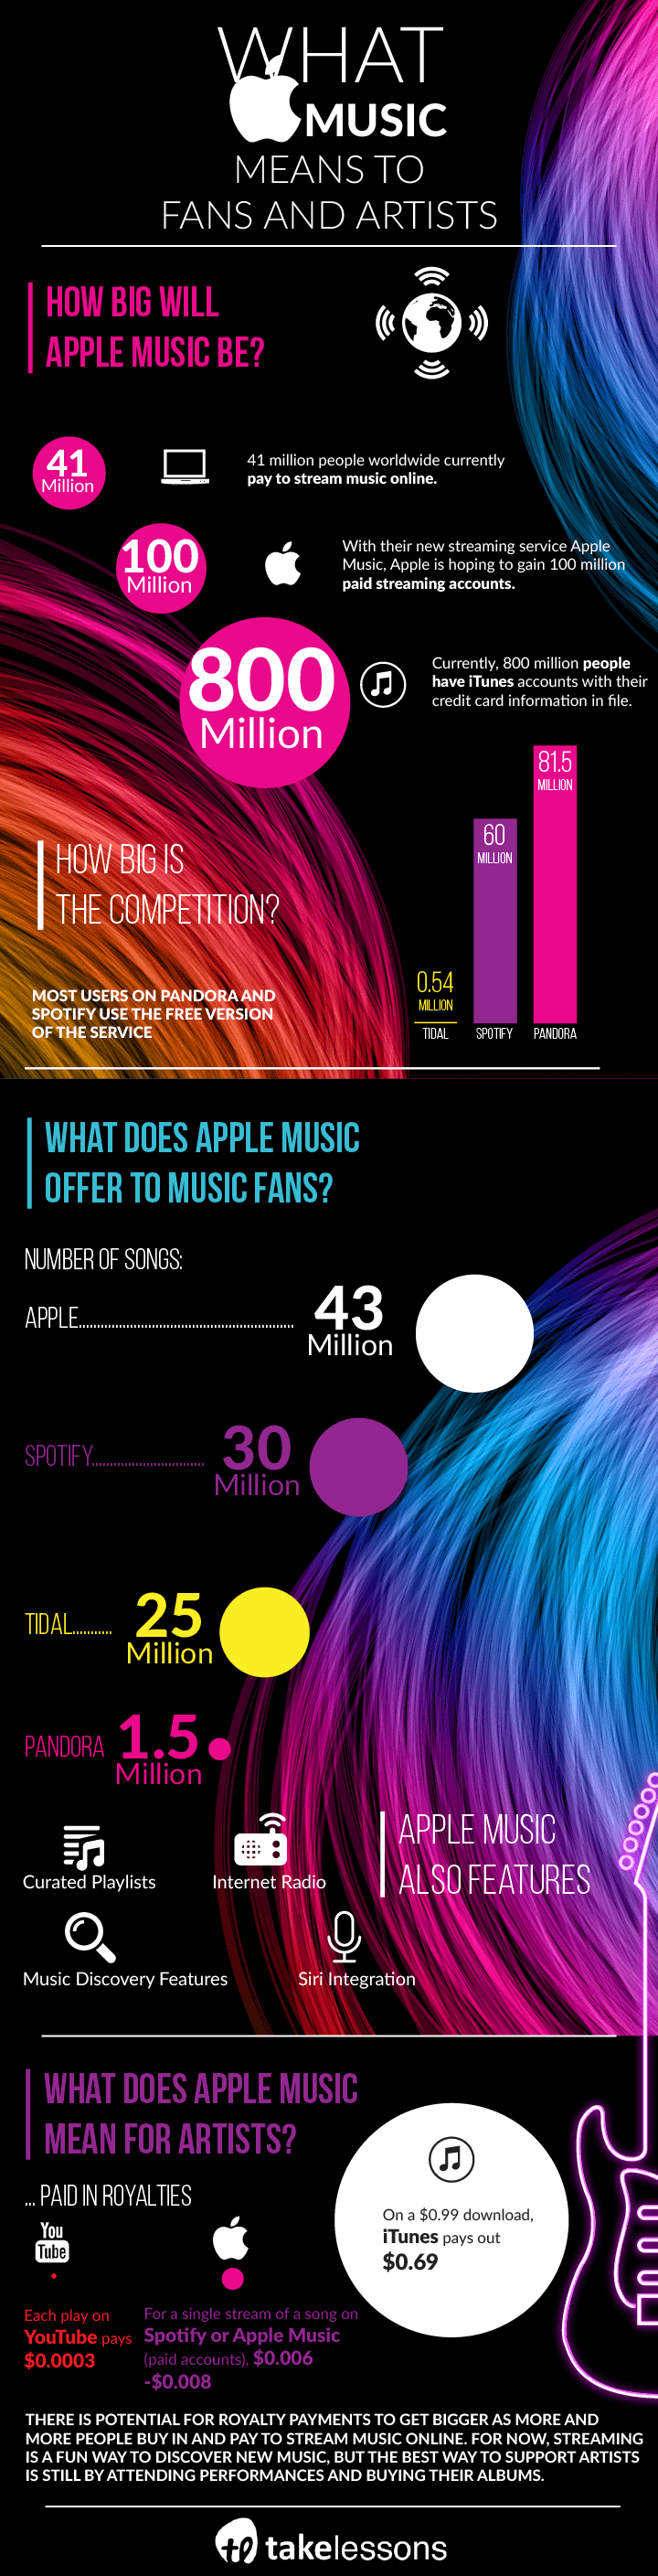 apple music streaming service infographic